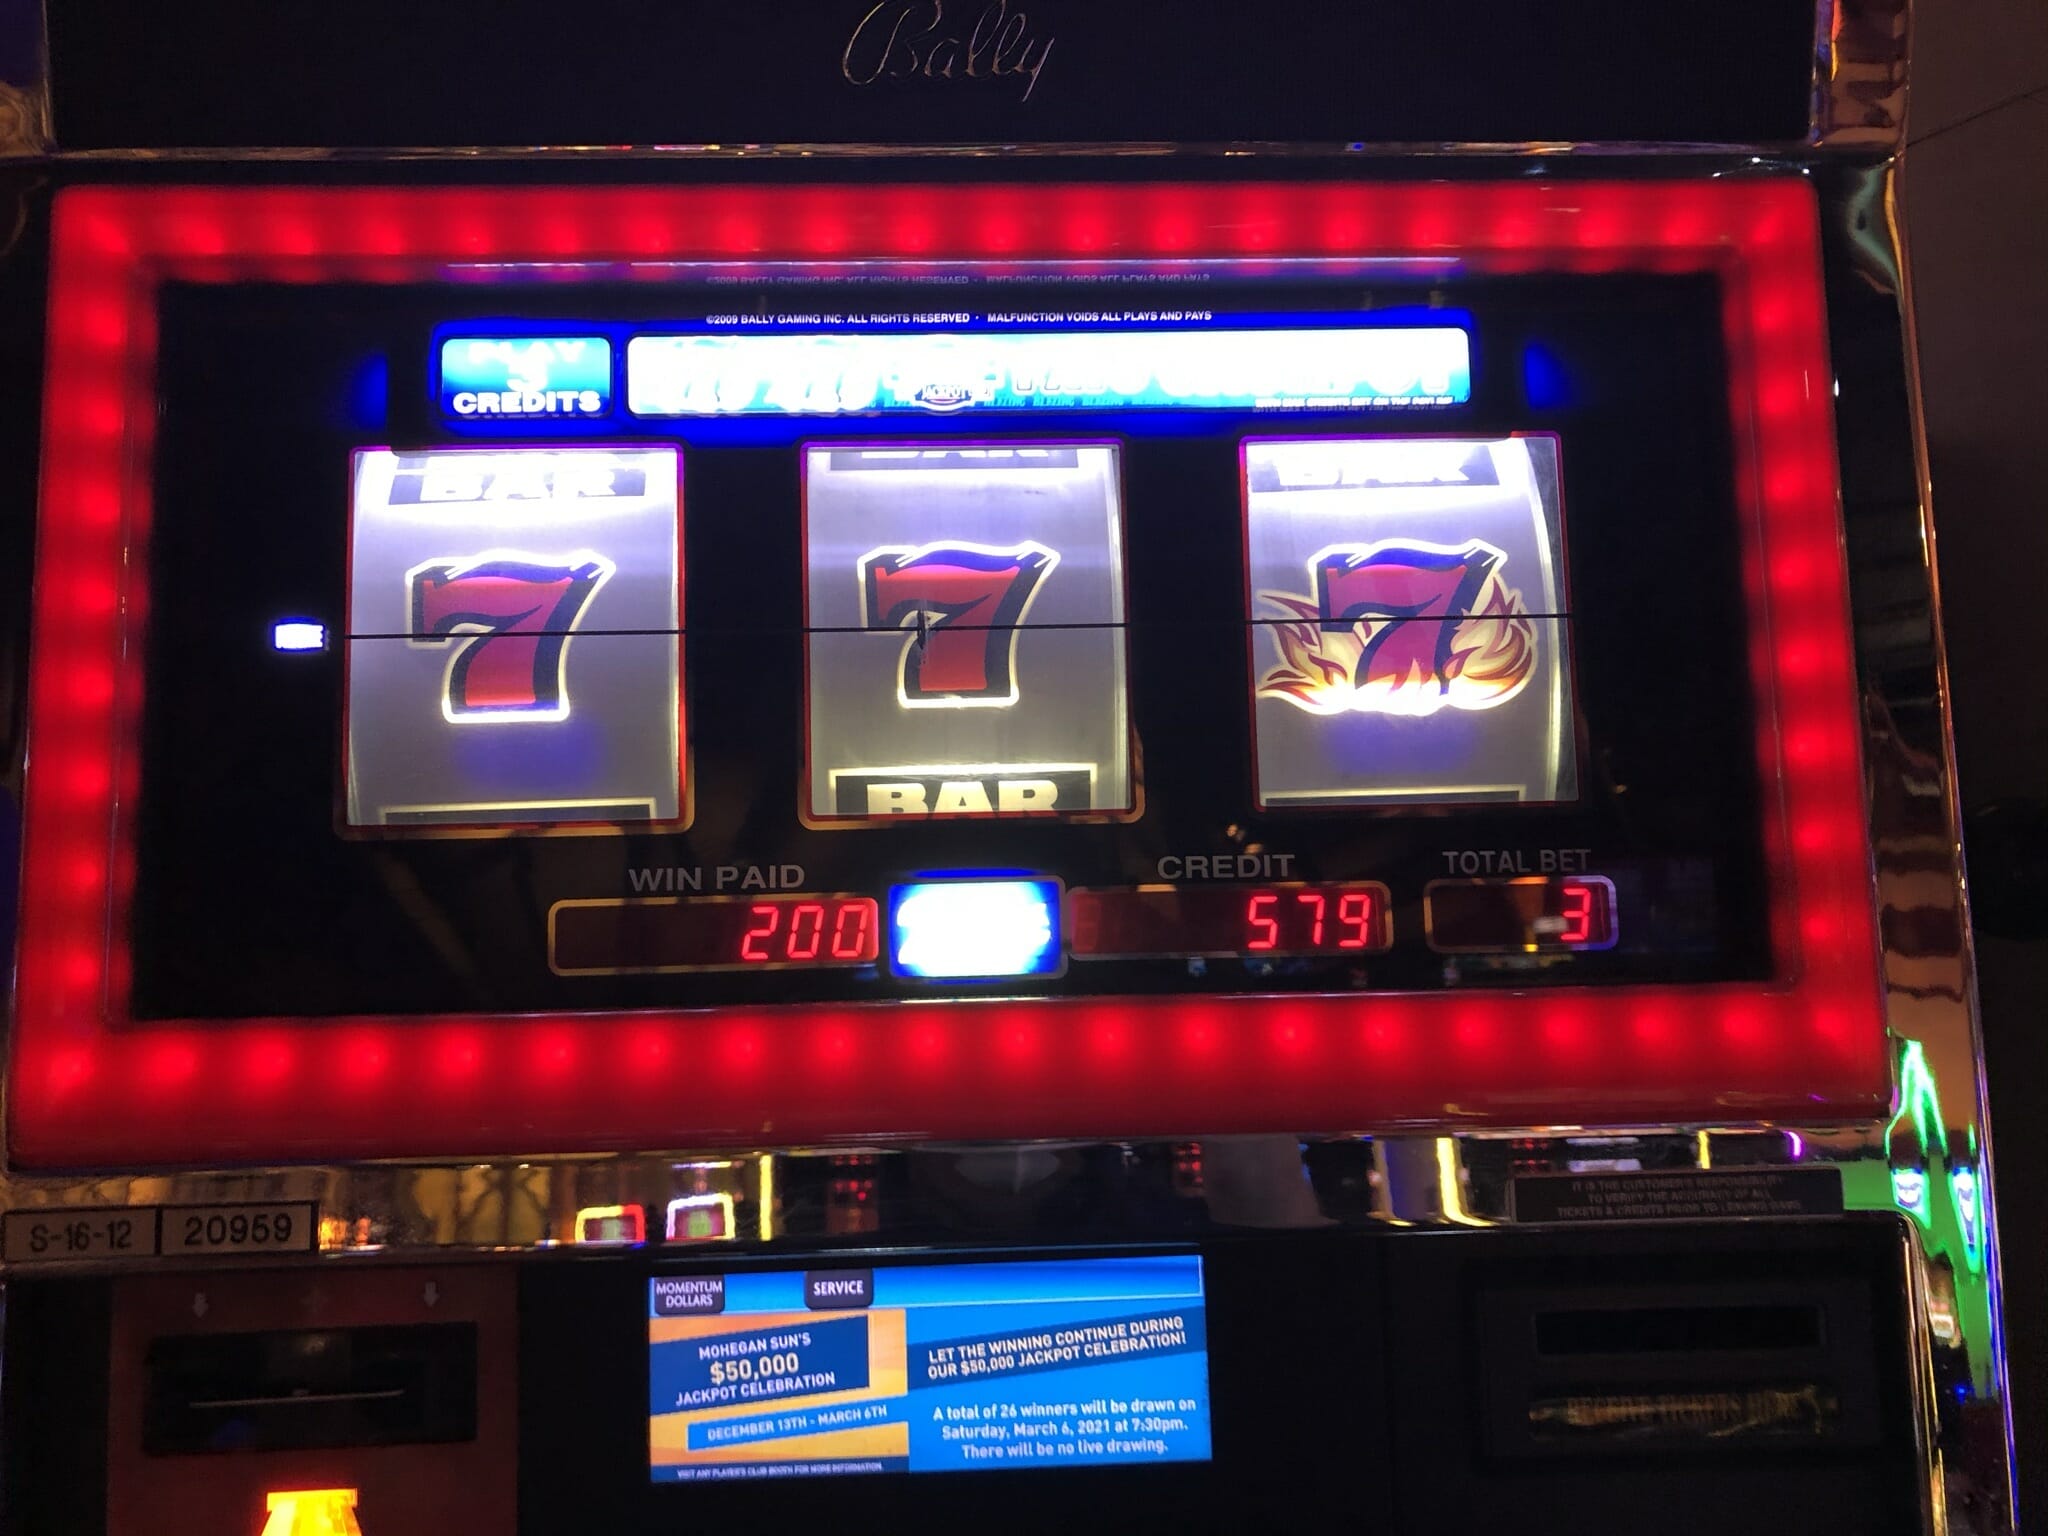 Birthday Magic Lines Up The Top Jackpot On Blazing Sevens With Only $60!